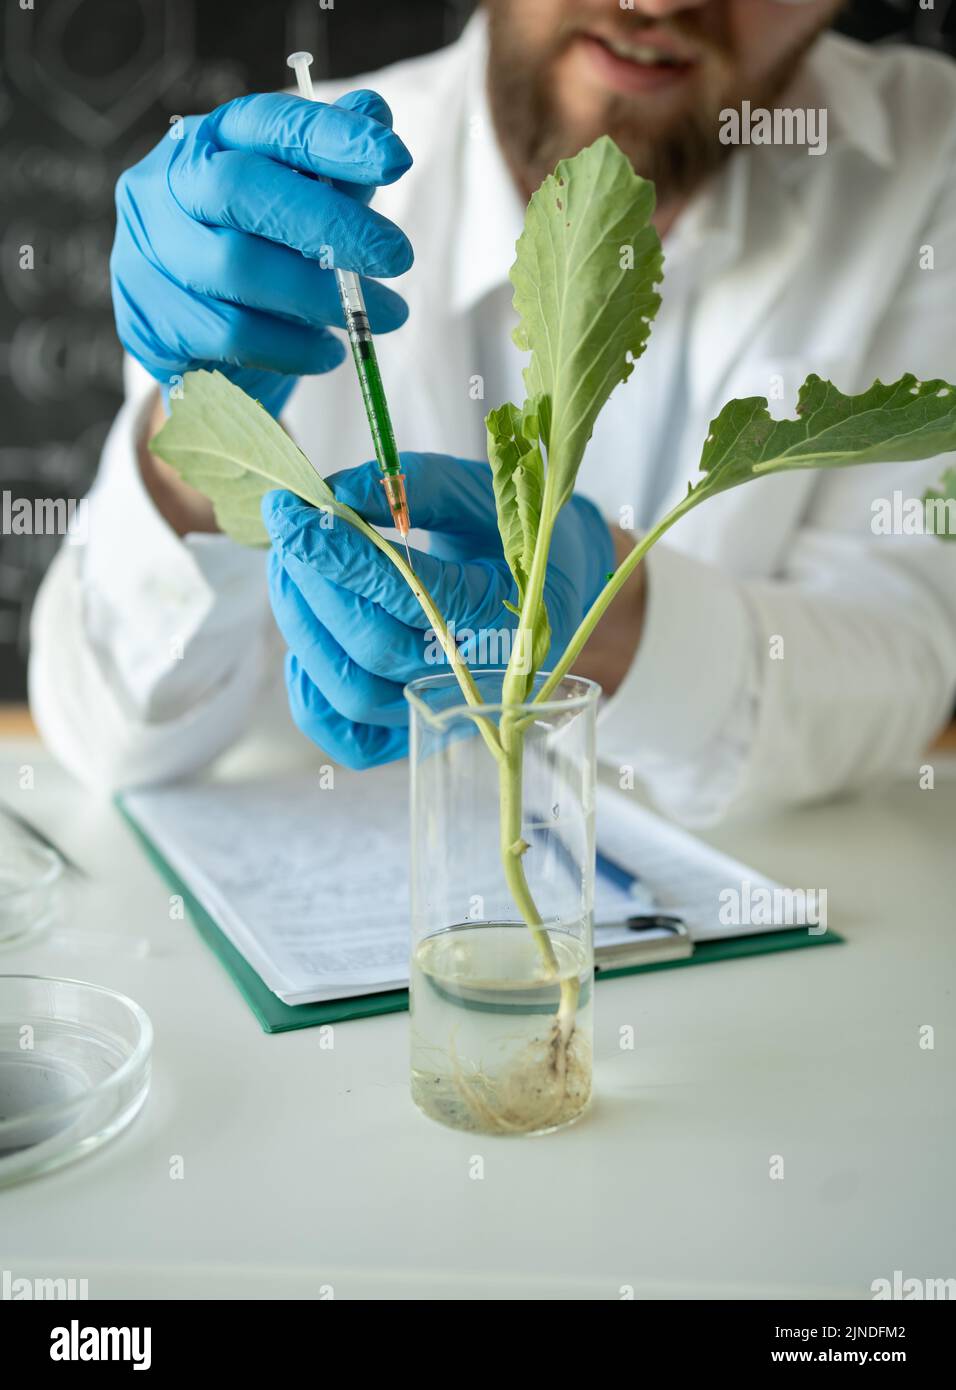 Male microbiologist looking at a healthy green plant in a sample flask. Medical scientist working in a food science laboratory Stock Photo